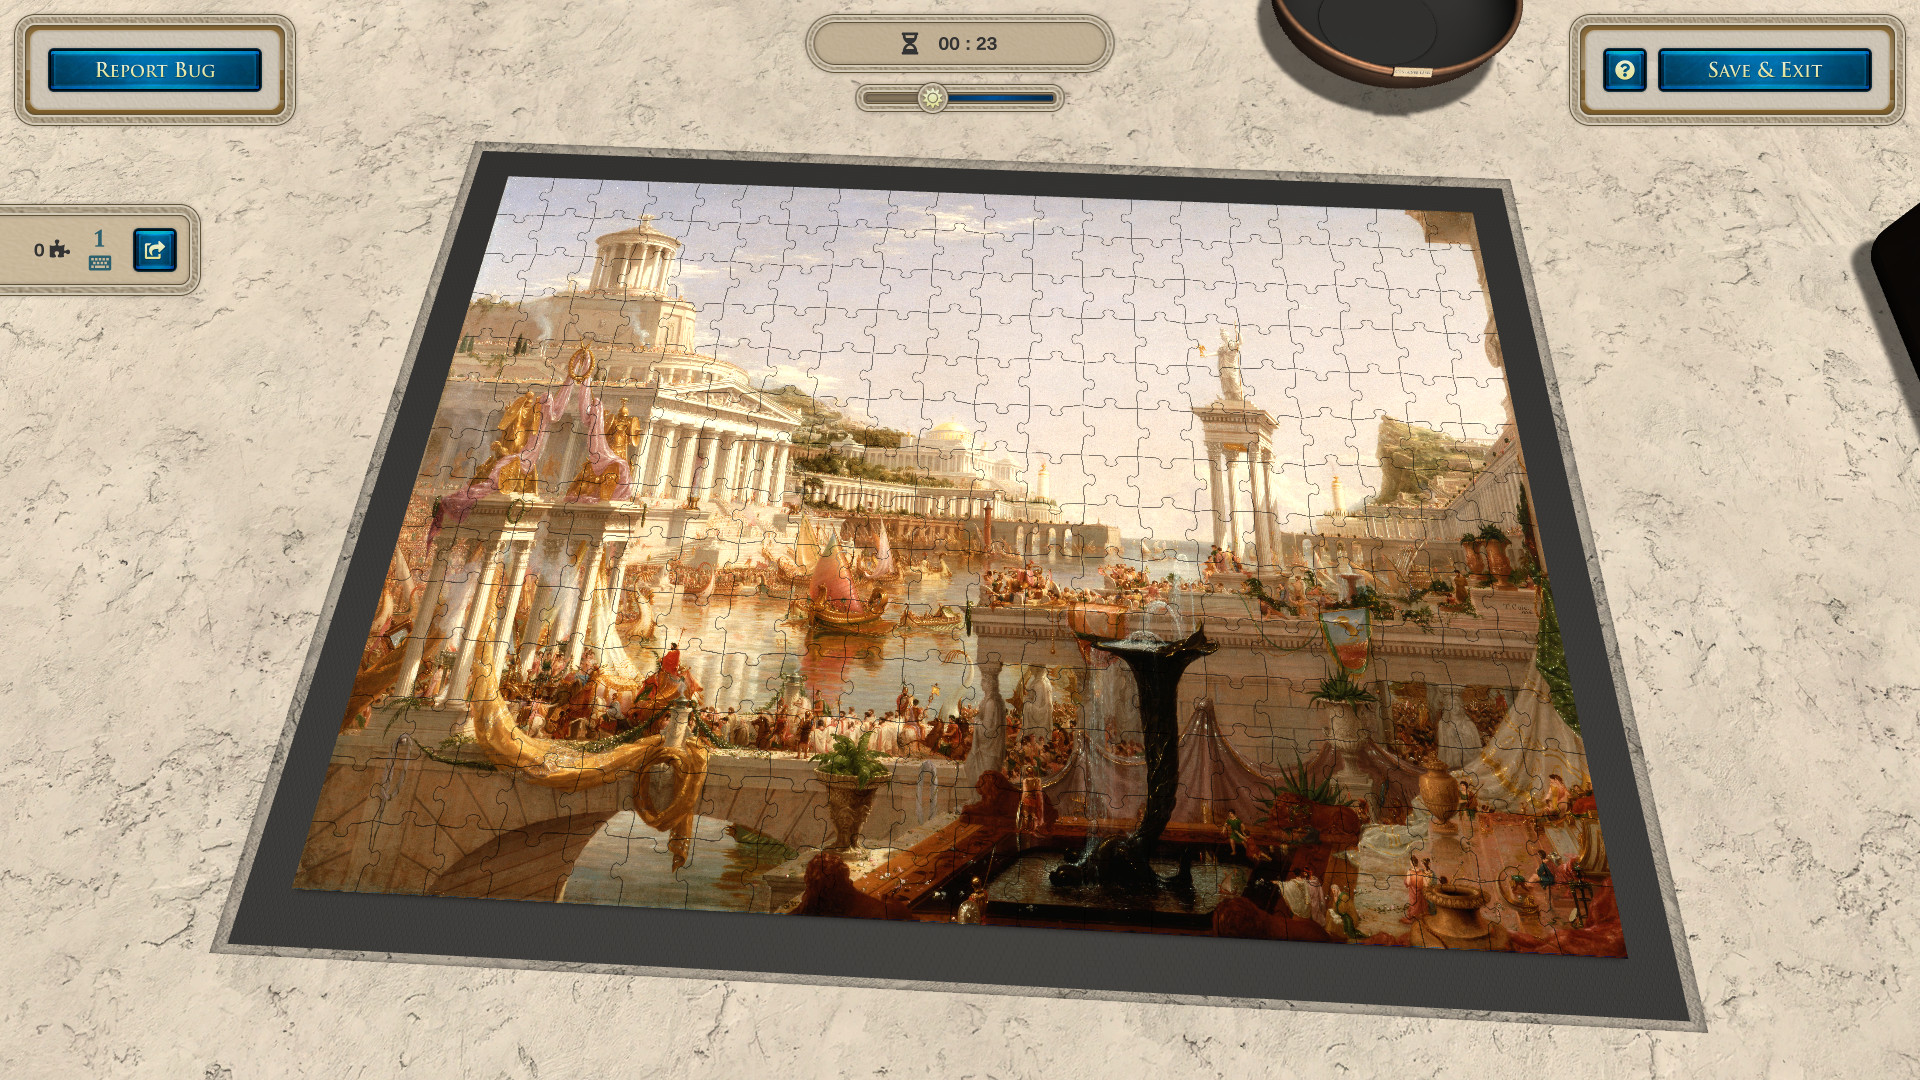 Masters Of Puzzle The Consummation Of Empire By Thomas Cole On Steam Images, Photos, Reviews